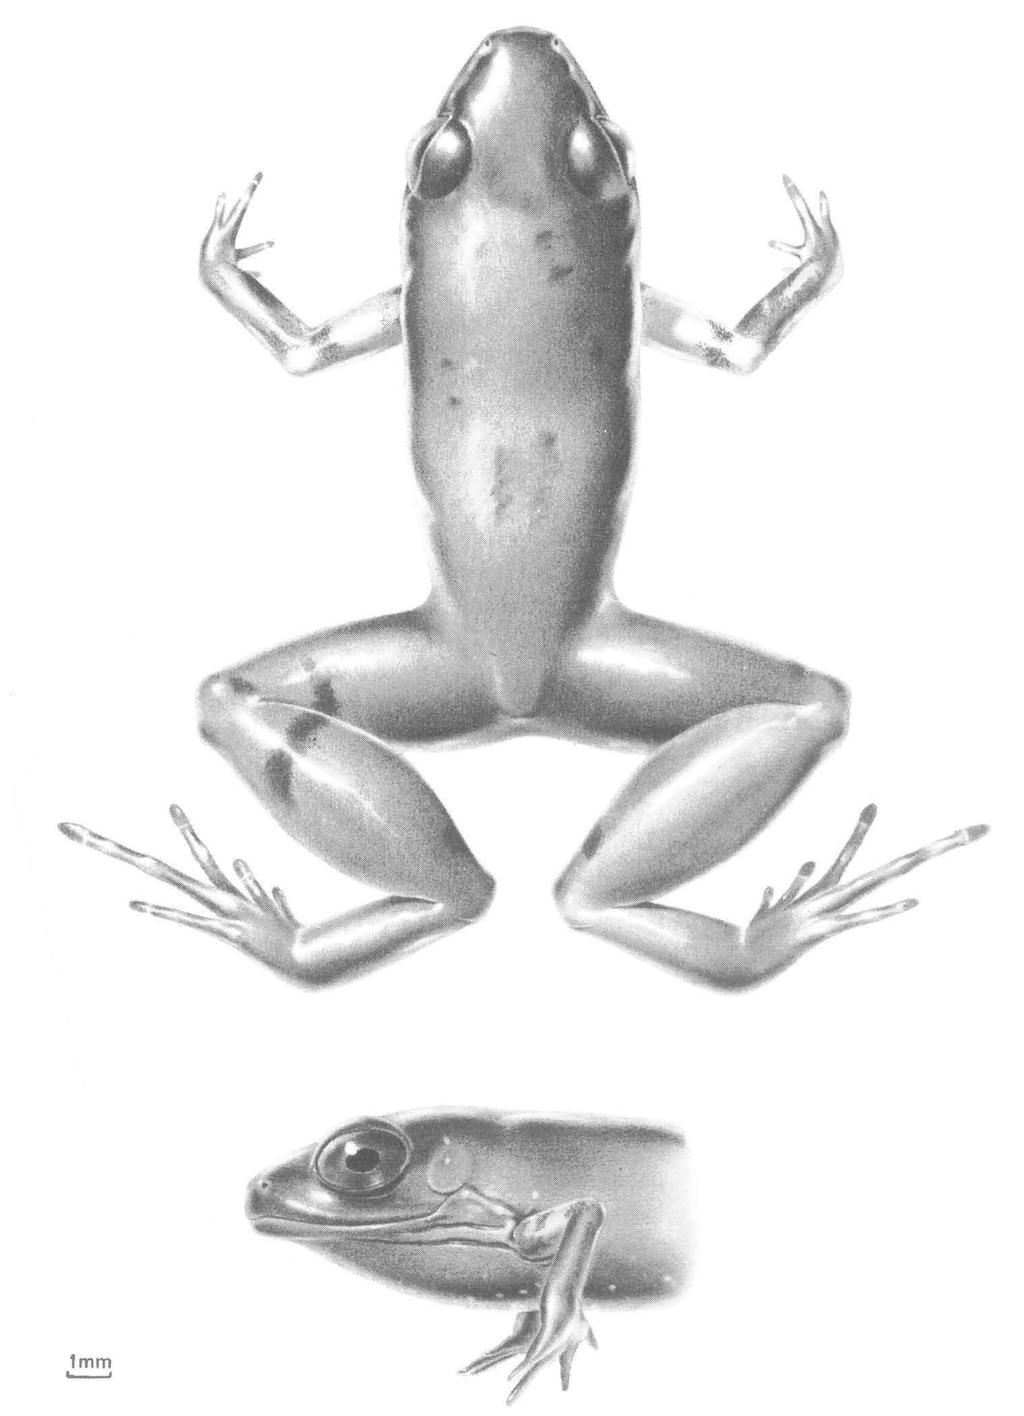 HOOGMOED & LESCURE: SOUTH AMERICAN FROGS 103 Fig. 8.